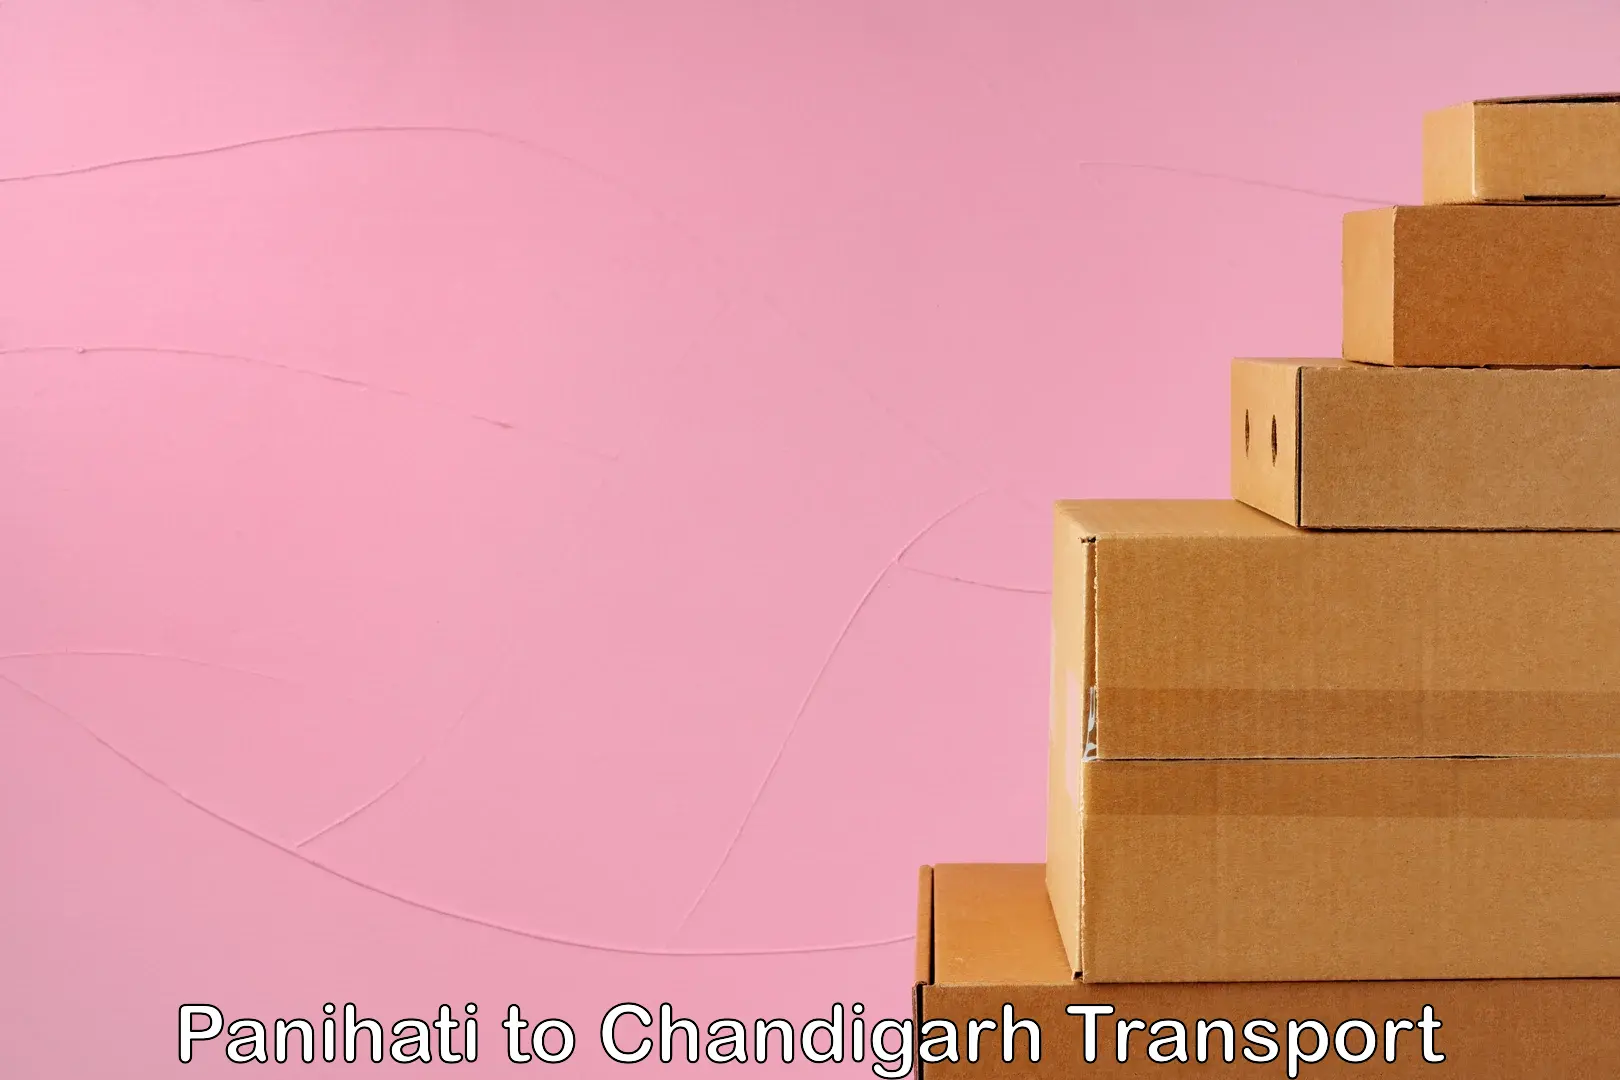 Air freight transport services Panihati to Chandigarh